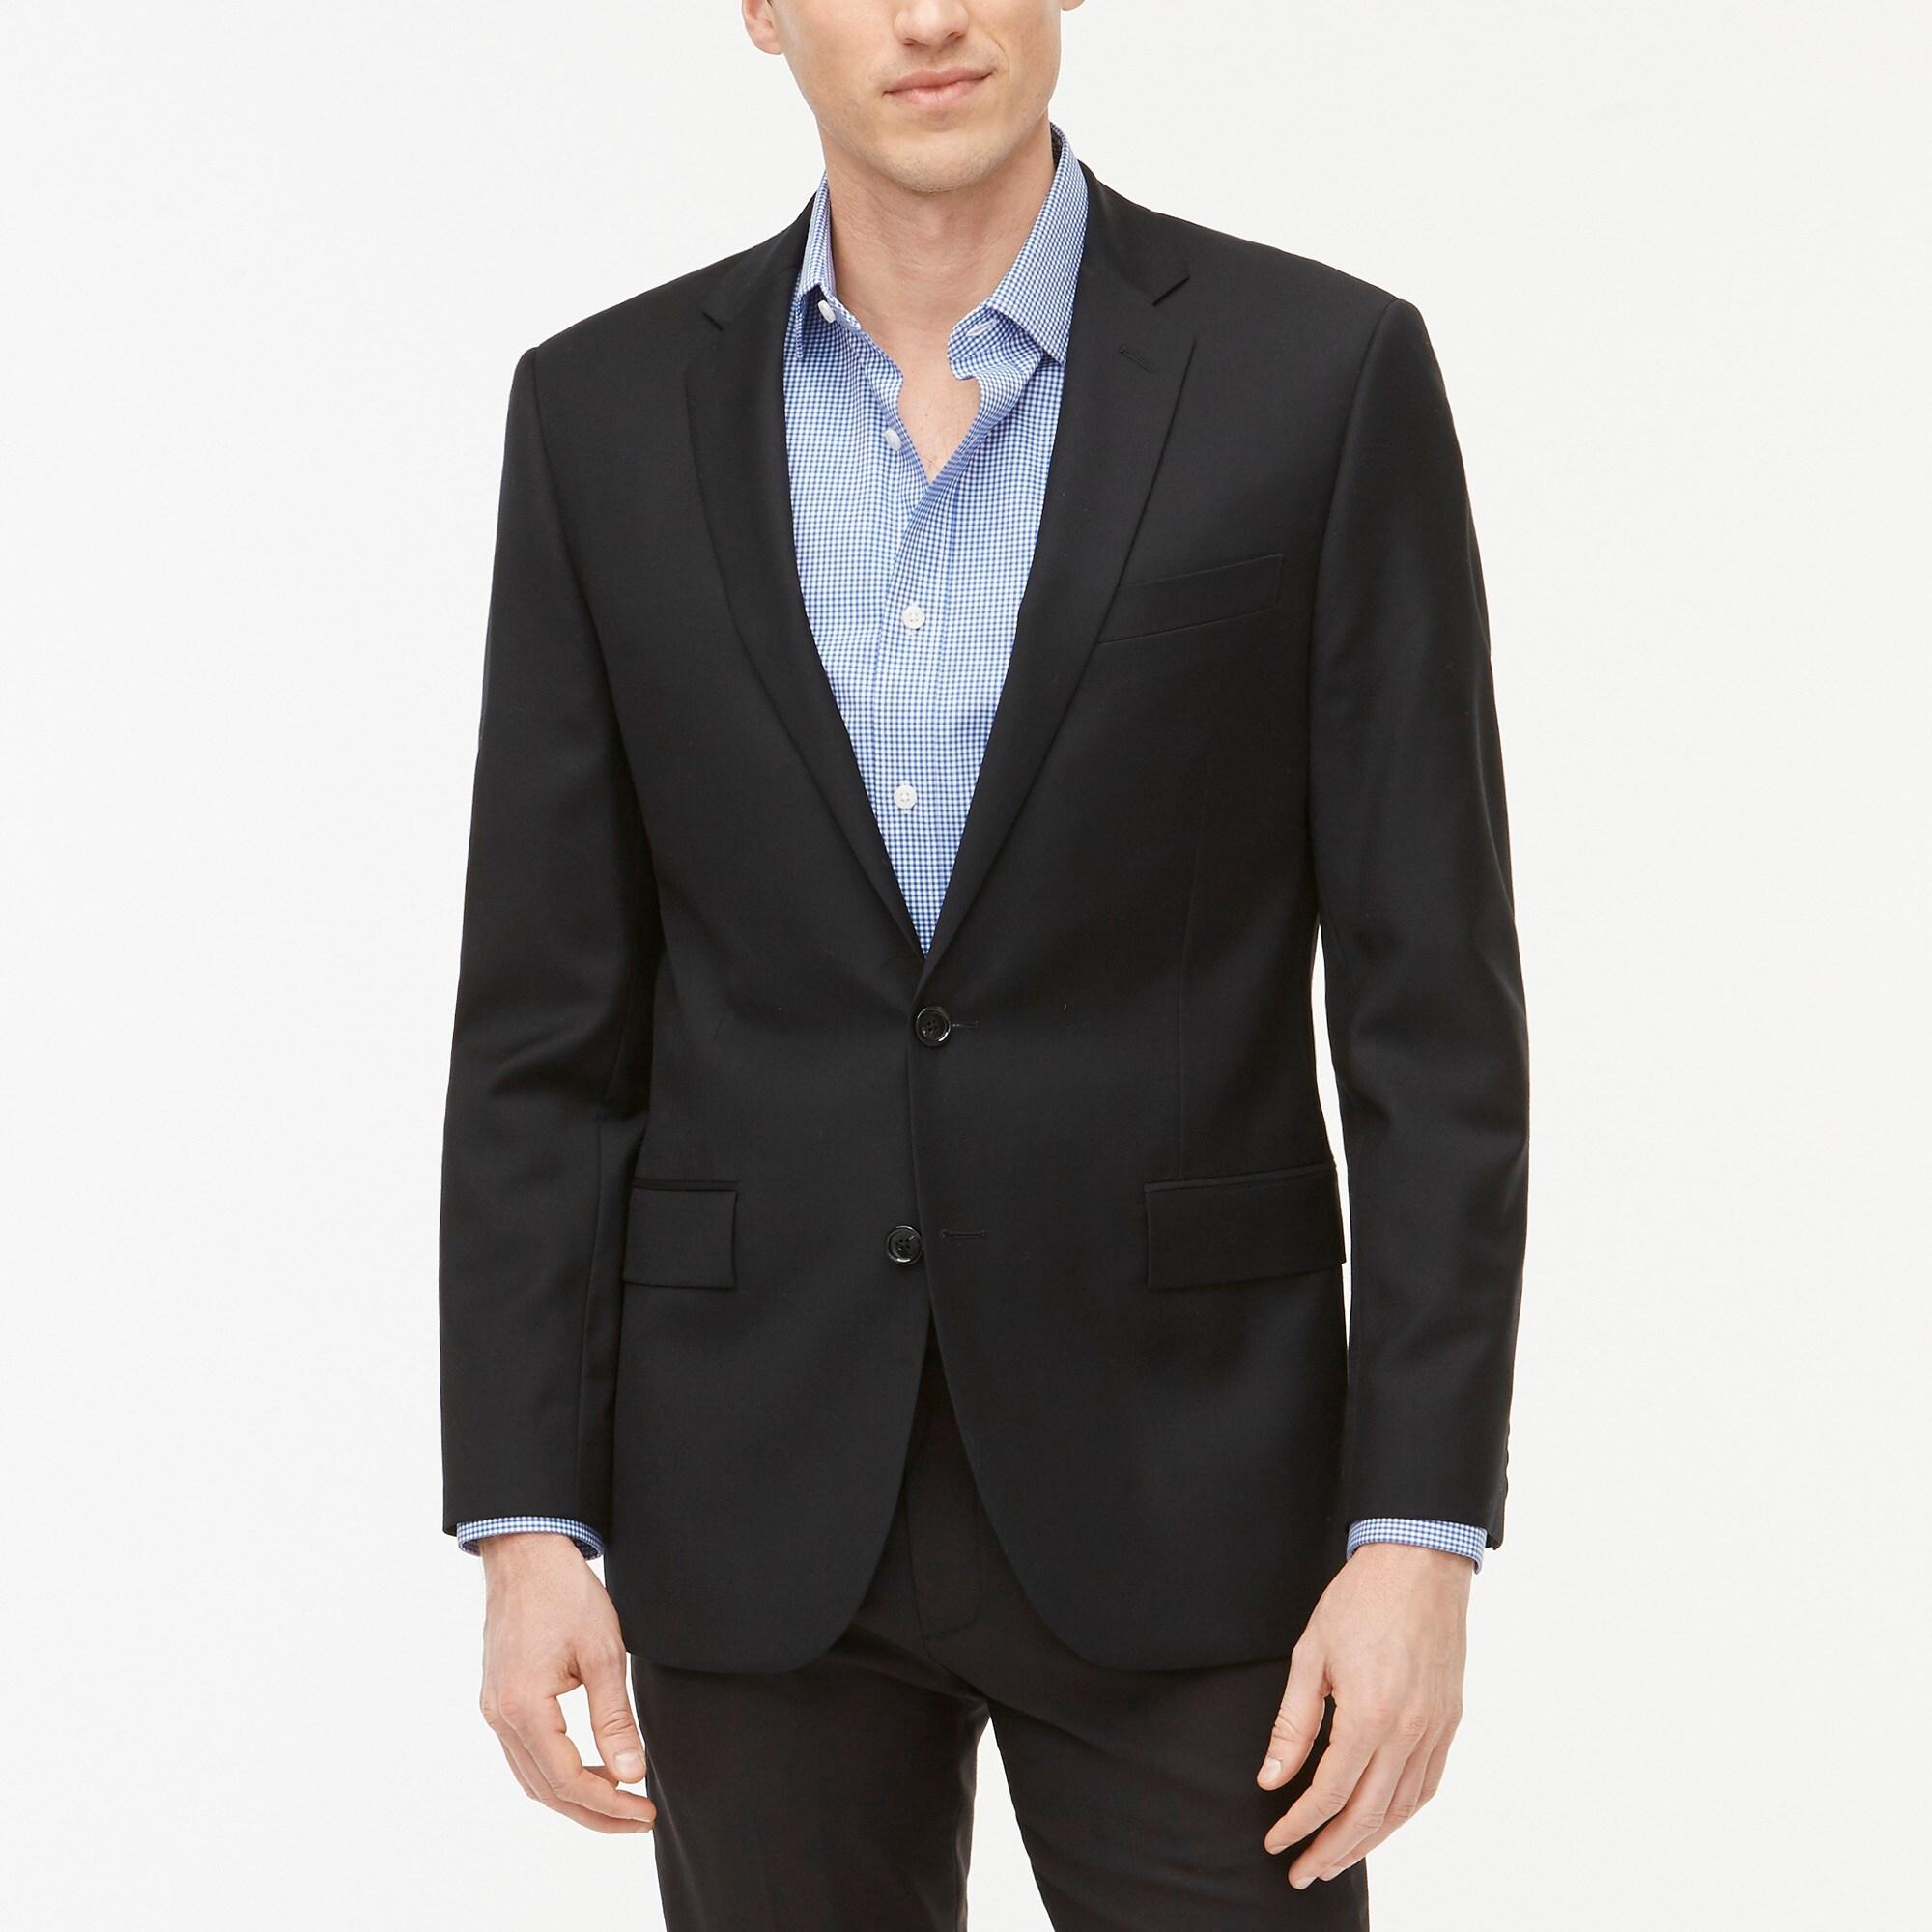 J.Crew Slim Thompson Suit Jacket In Worsted Wool in Black for Men - Lyst